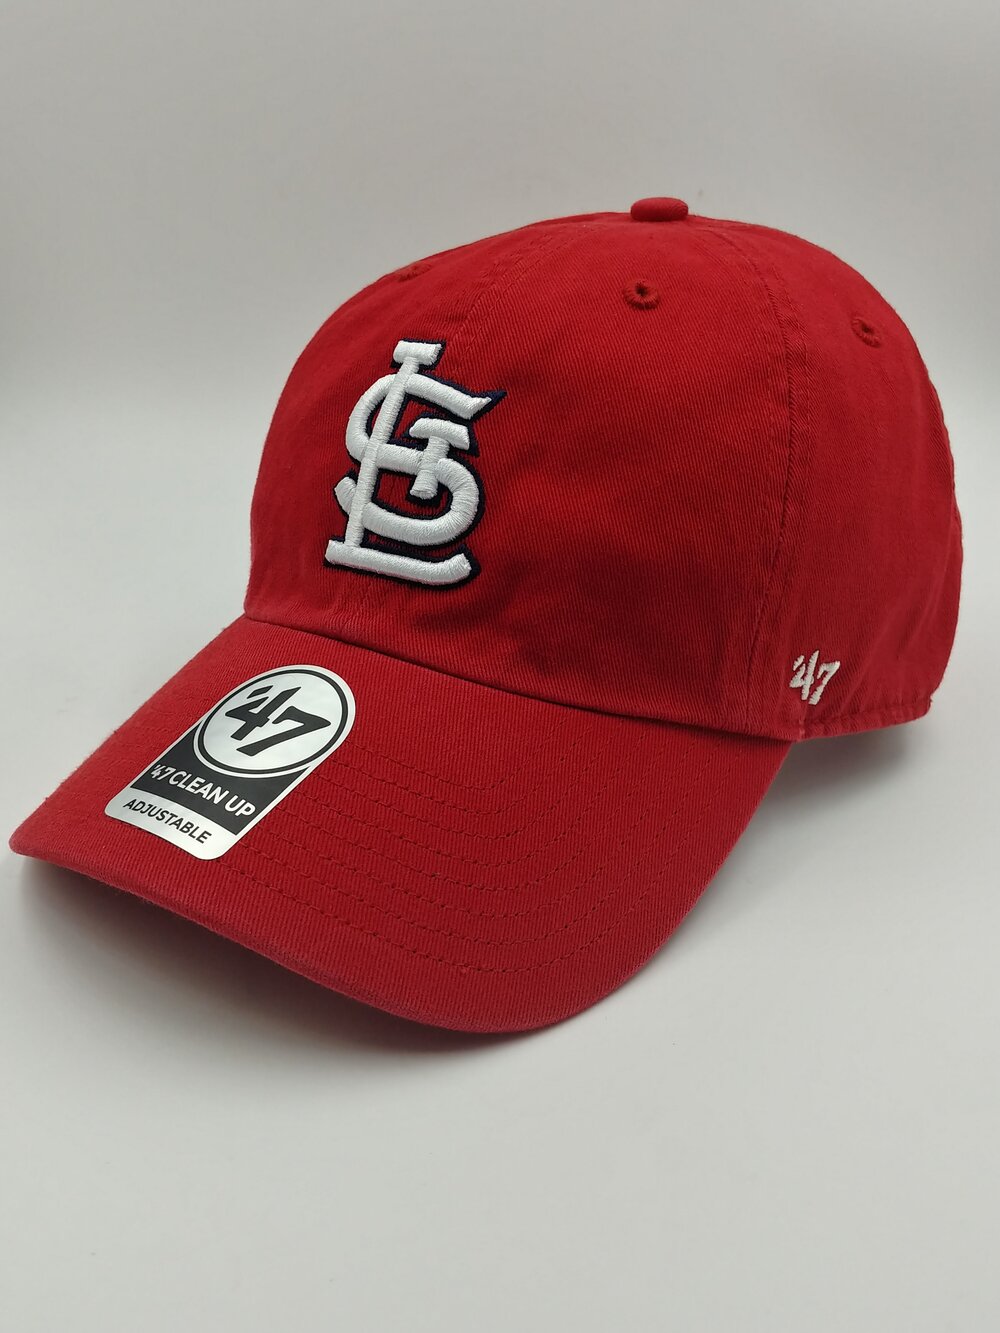 Cardinals Red STL '47 Brand Clean Up — Hats N Stuff